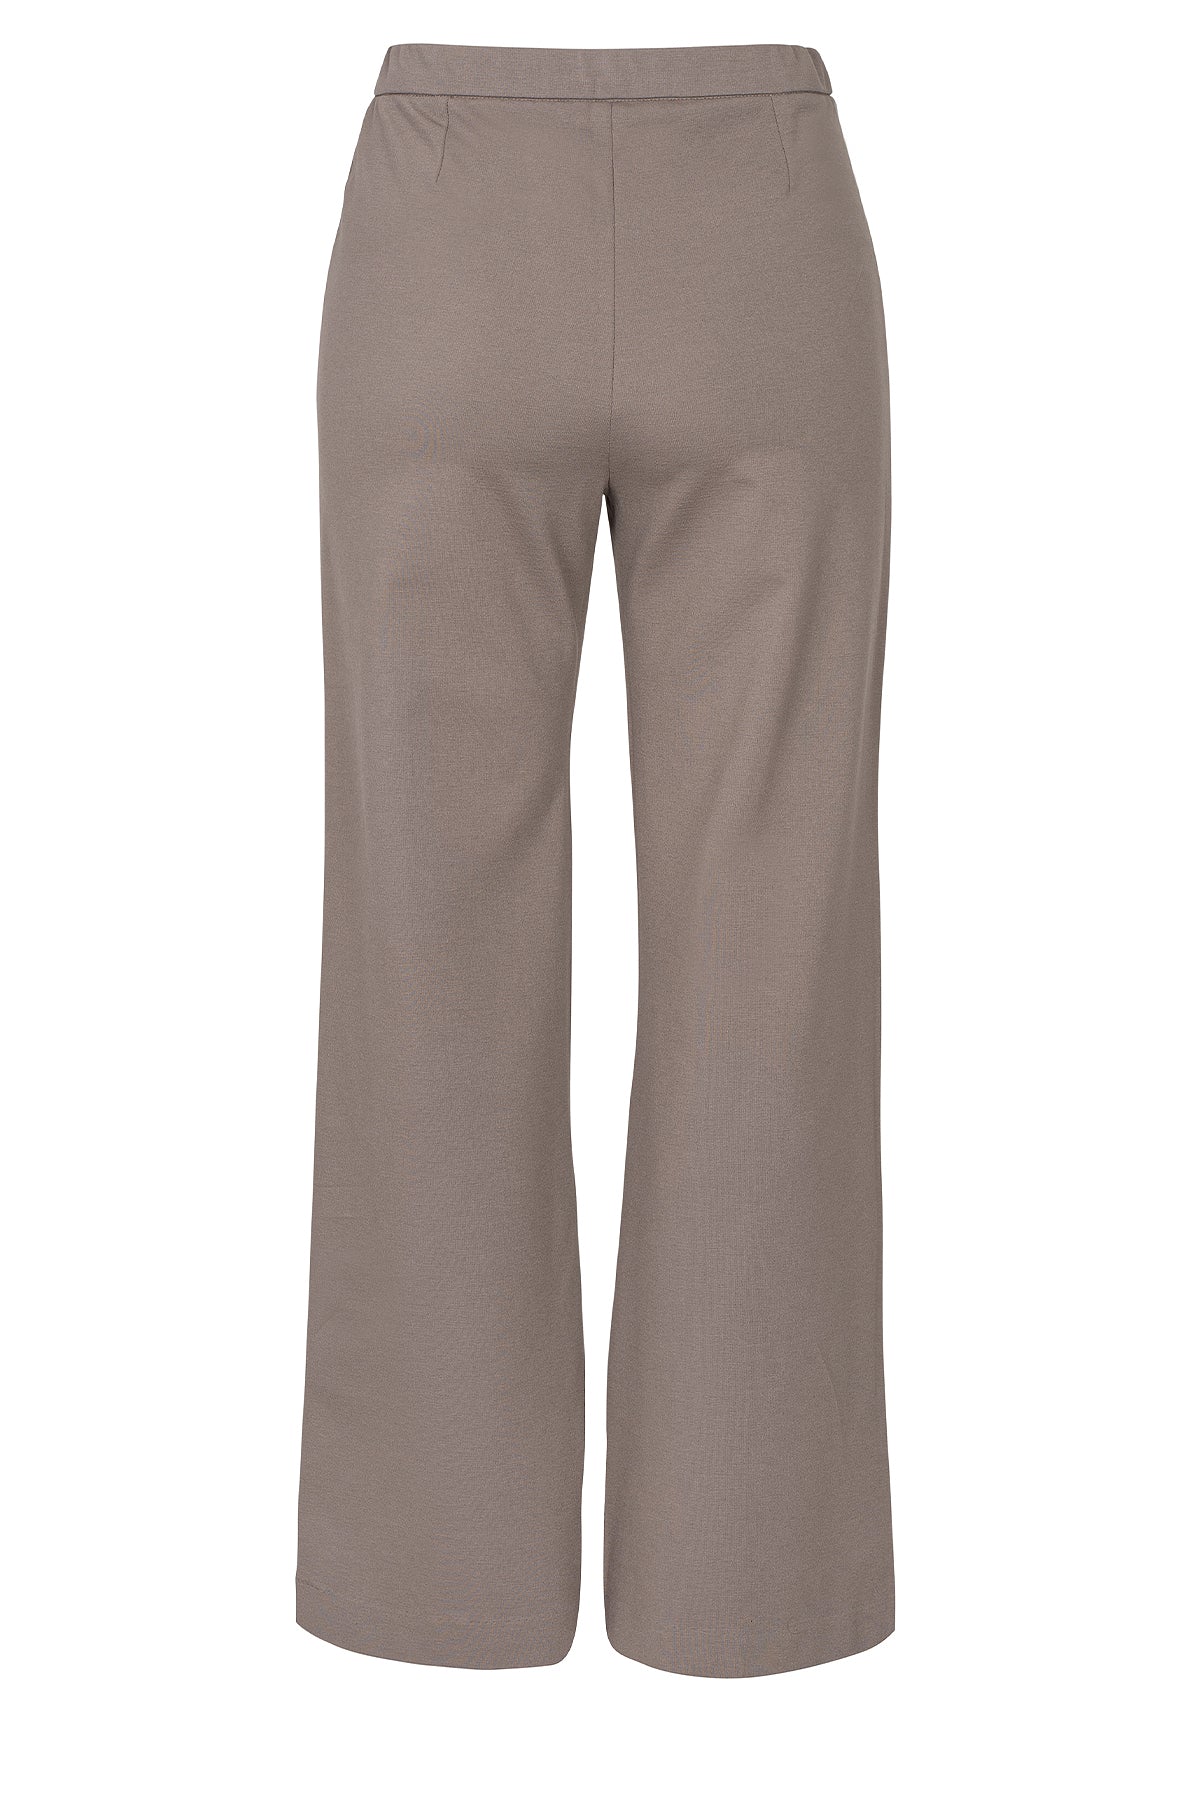 LUXZUZ // ONE TWO Beate Pant Pant 765 Drift Wood